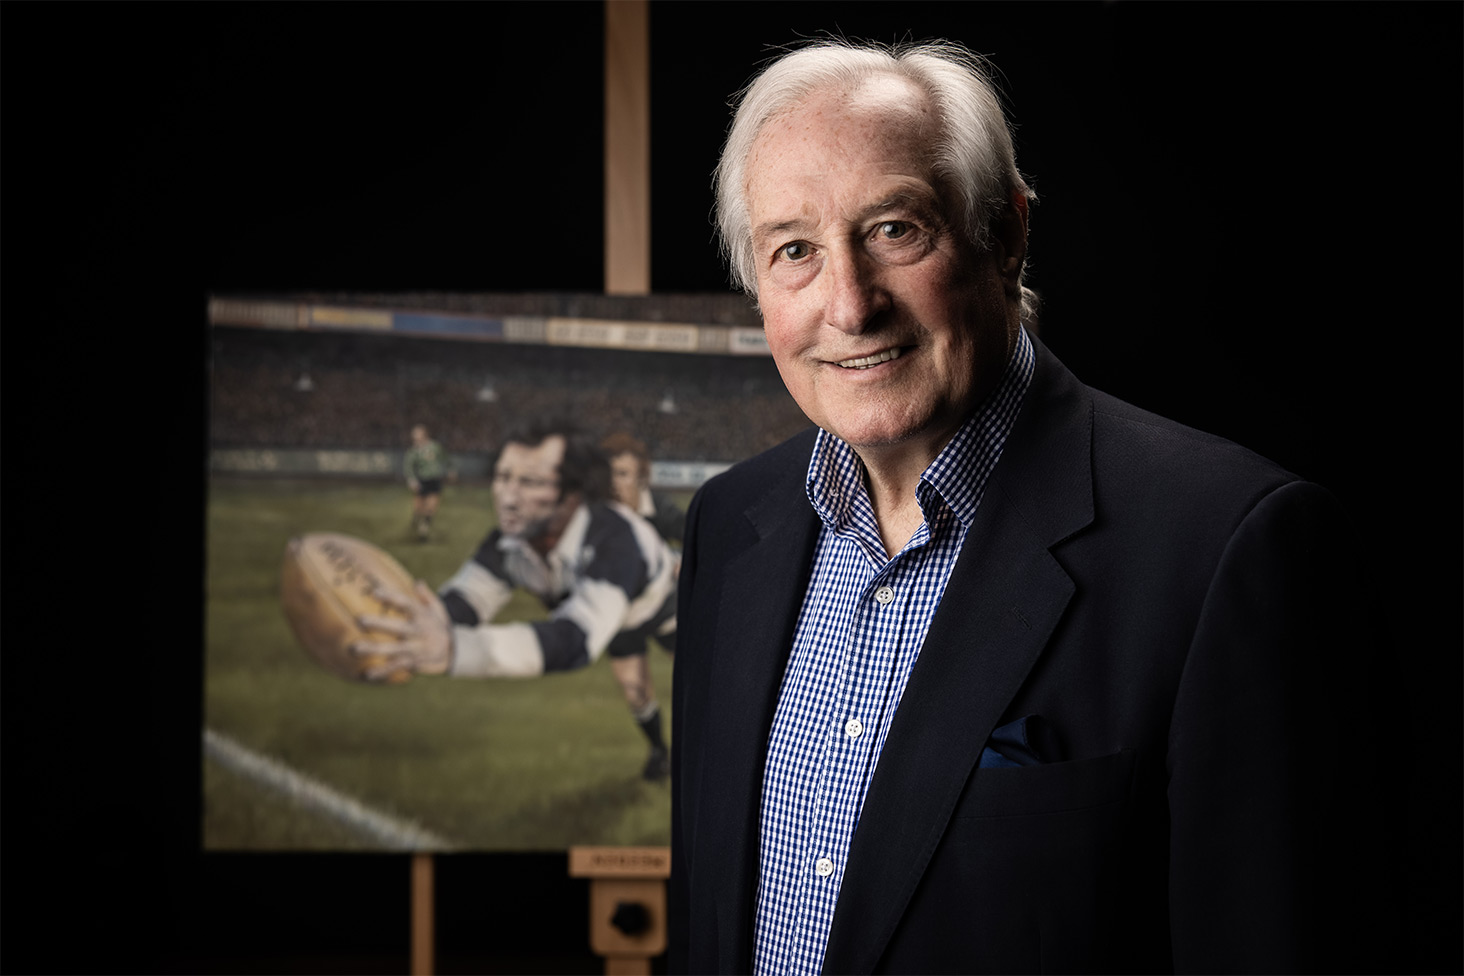 Gareth Edwards standing next to 'The Greatest Try' painting